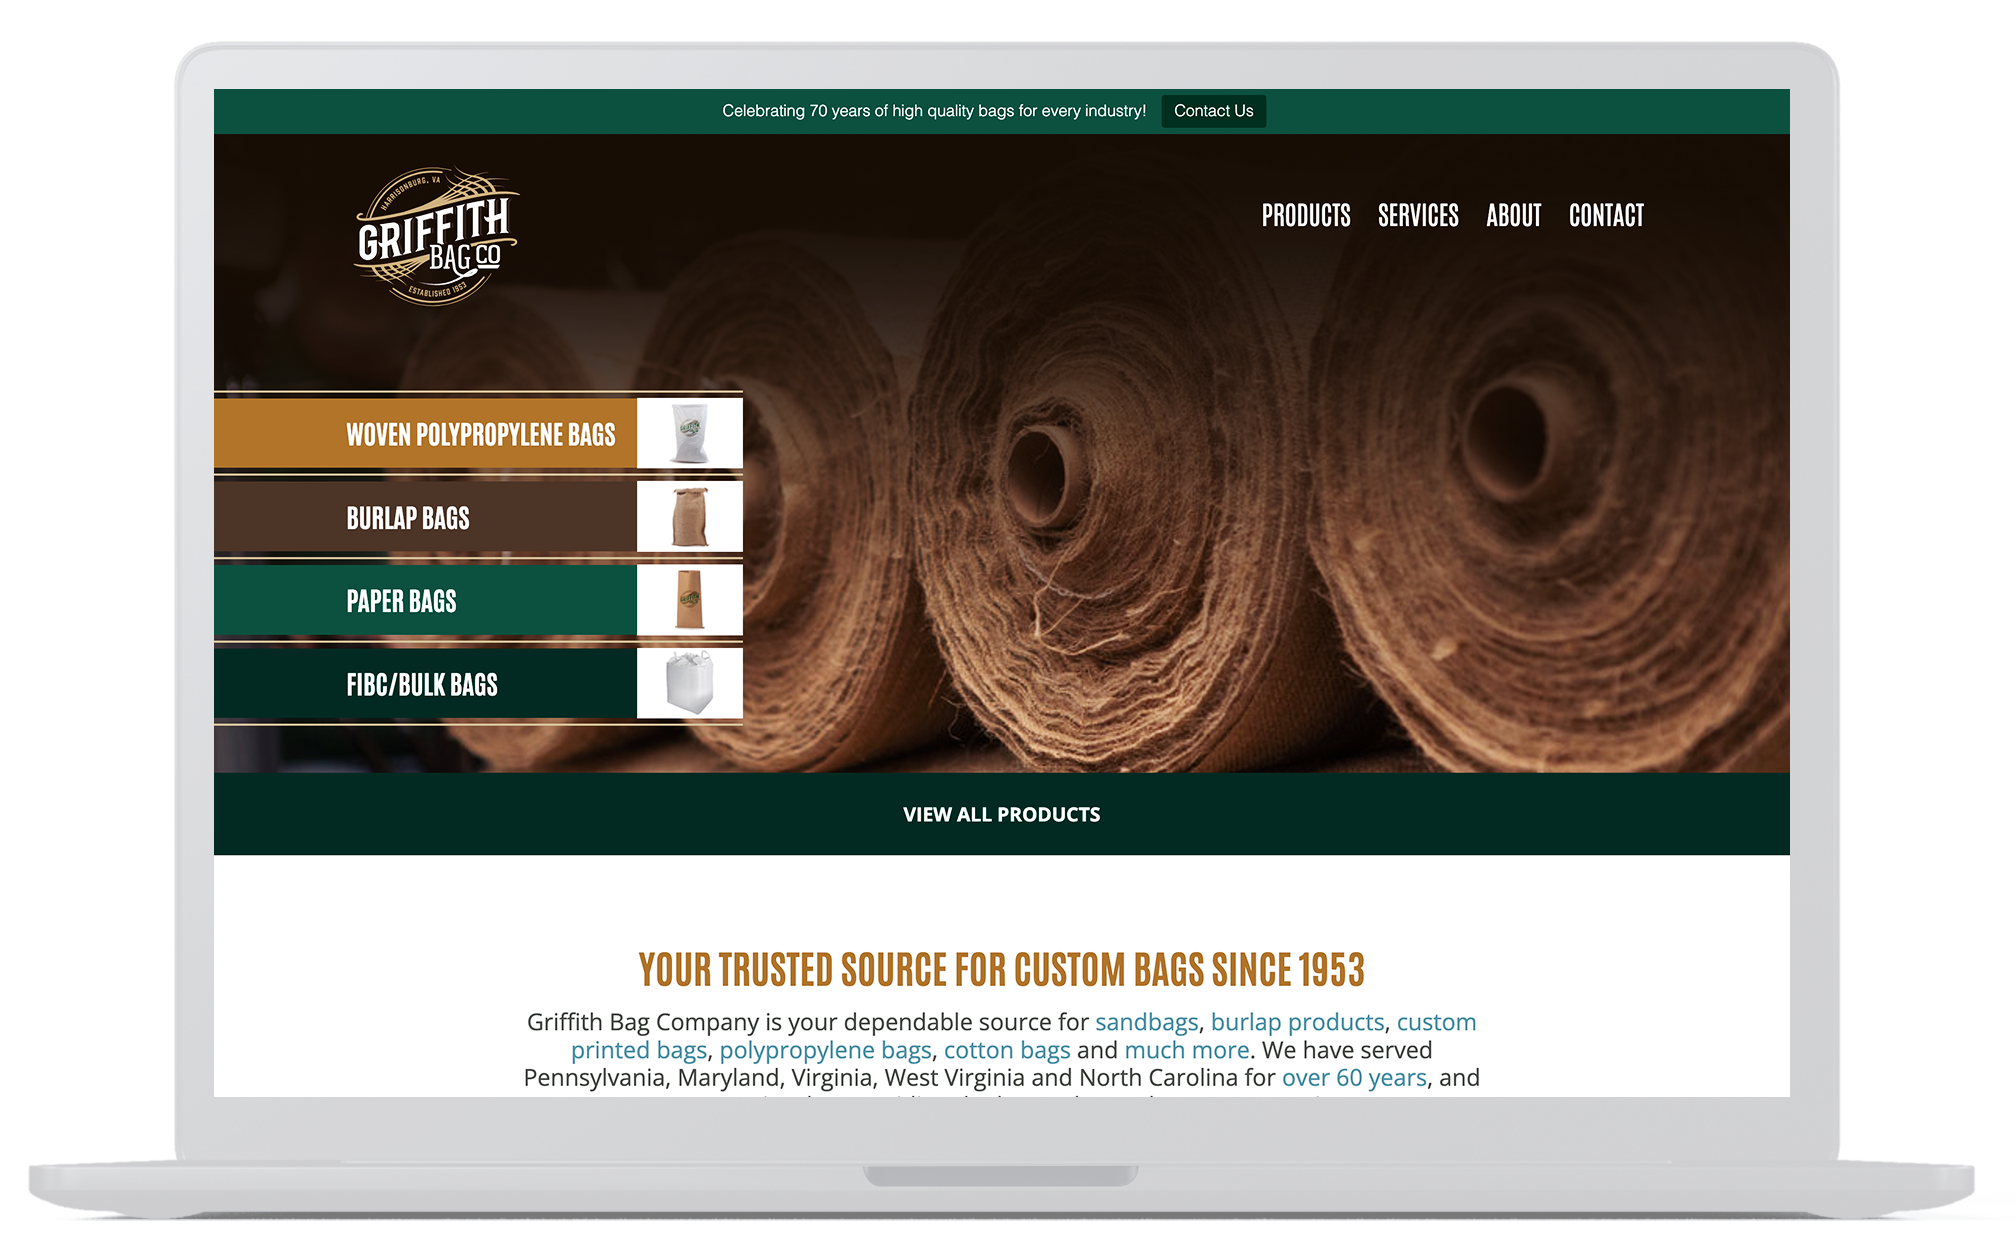 Griffith Website Design Company For Ag Industry